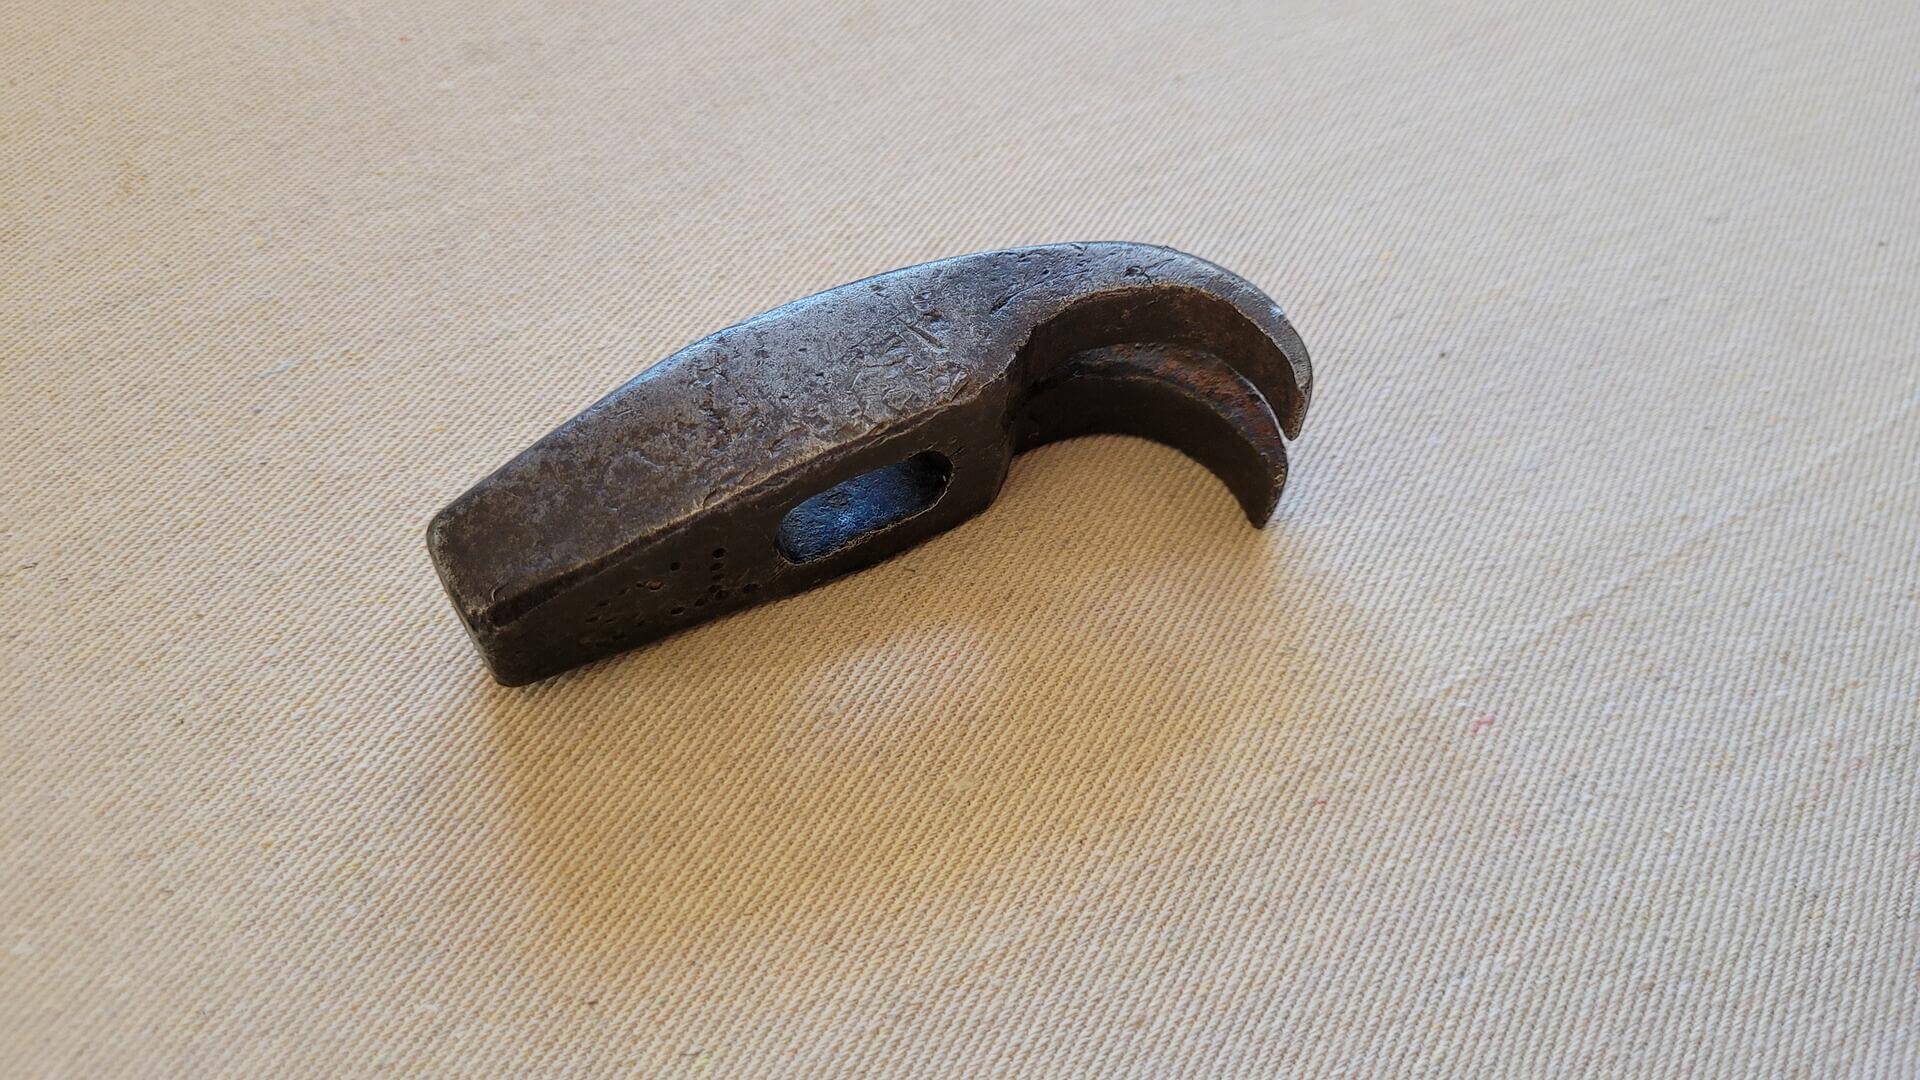 Vintage curved tapered claw farrier and cobbler tack hammer head 4 inches long. Antique collectible primitive leatherworking and upholstery striking hand tool